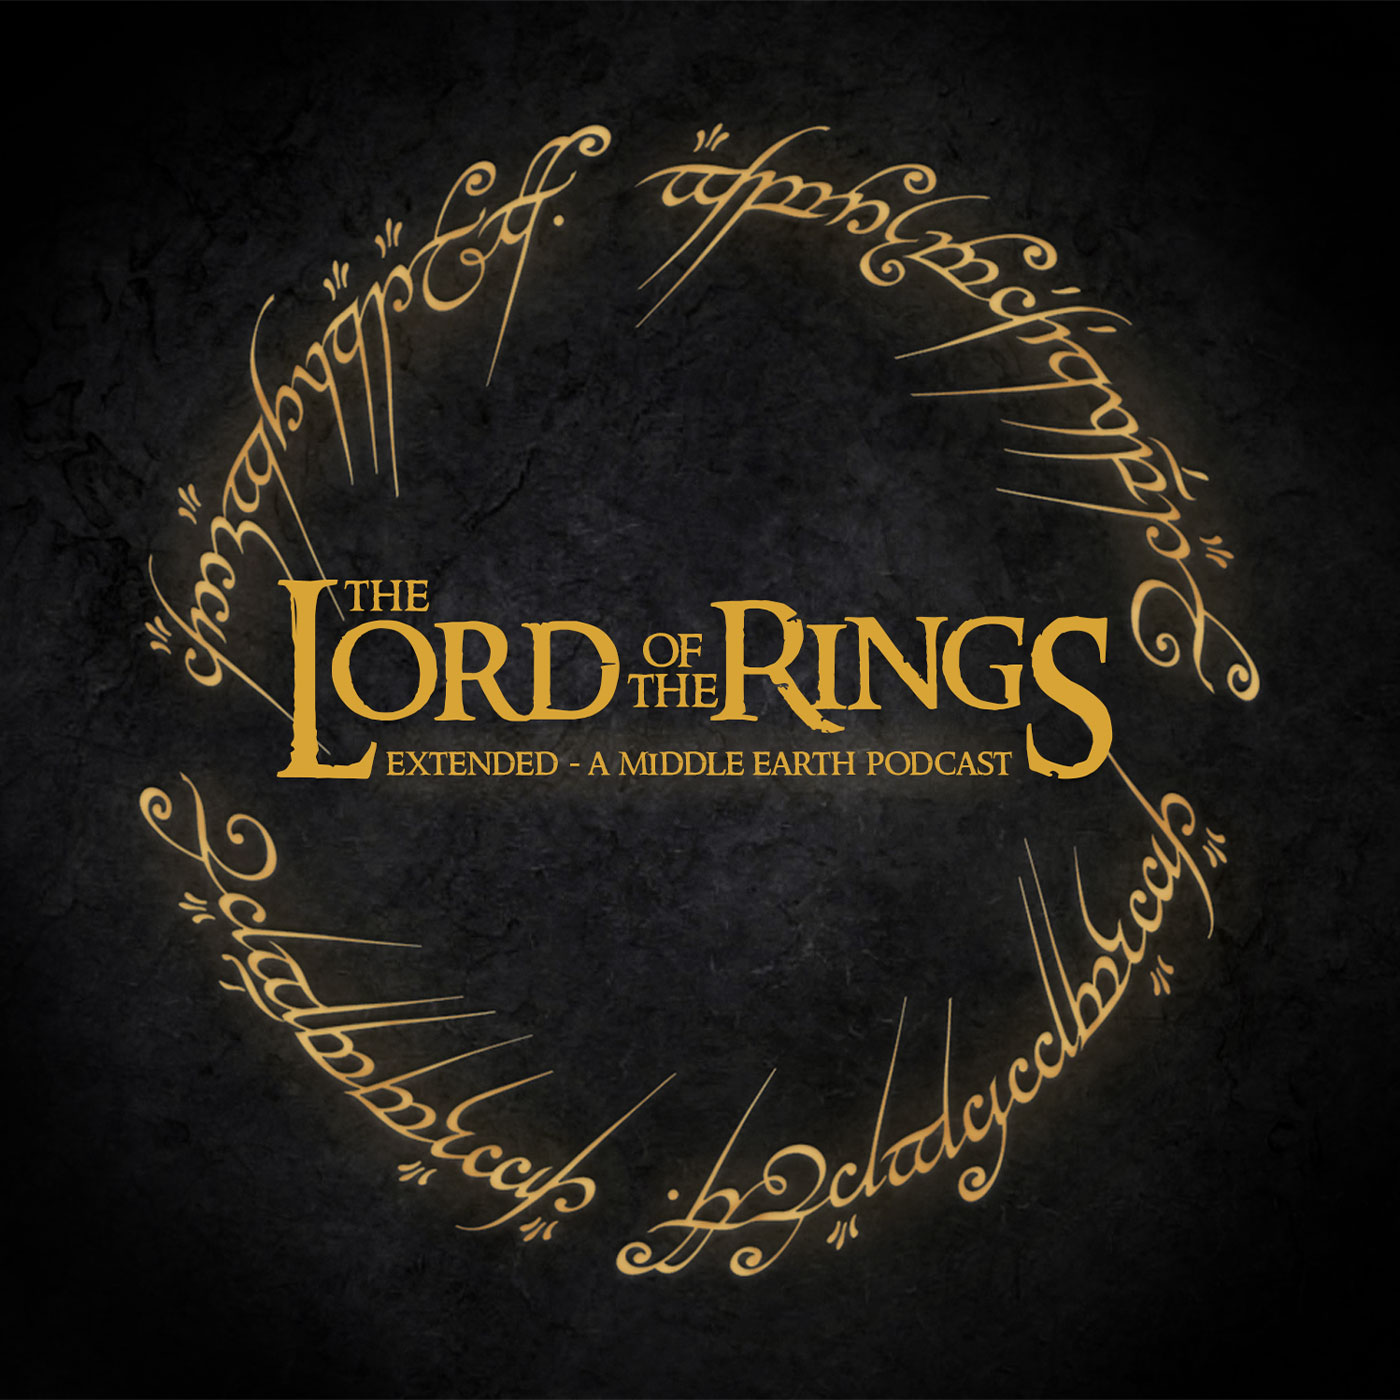 The Lord of the Rings: Extended - A Middle Earth Podcast